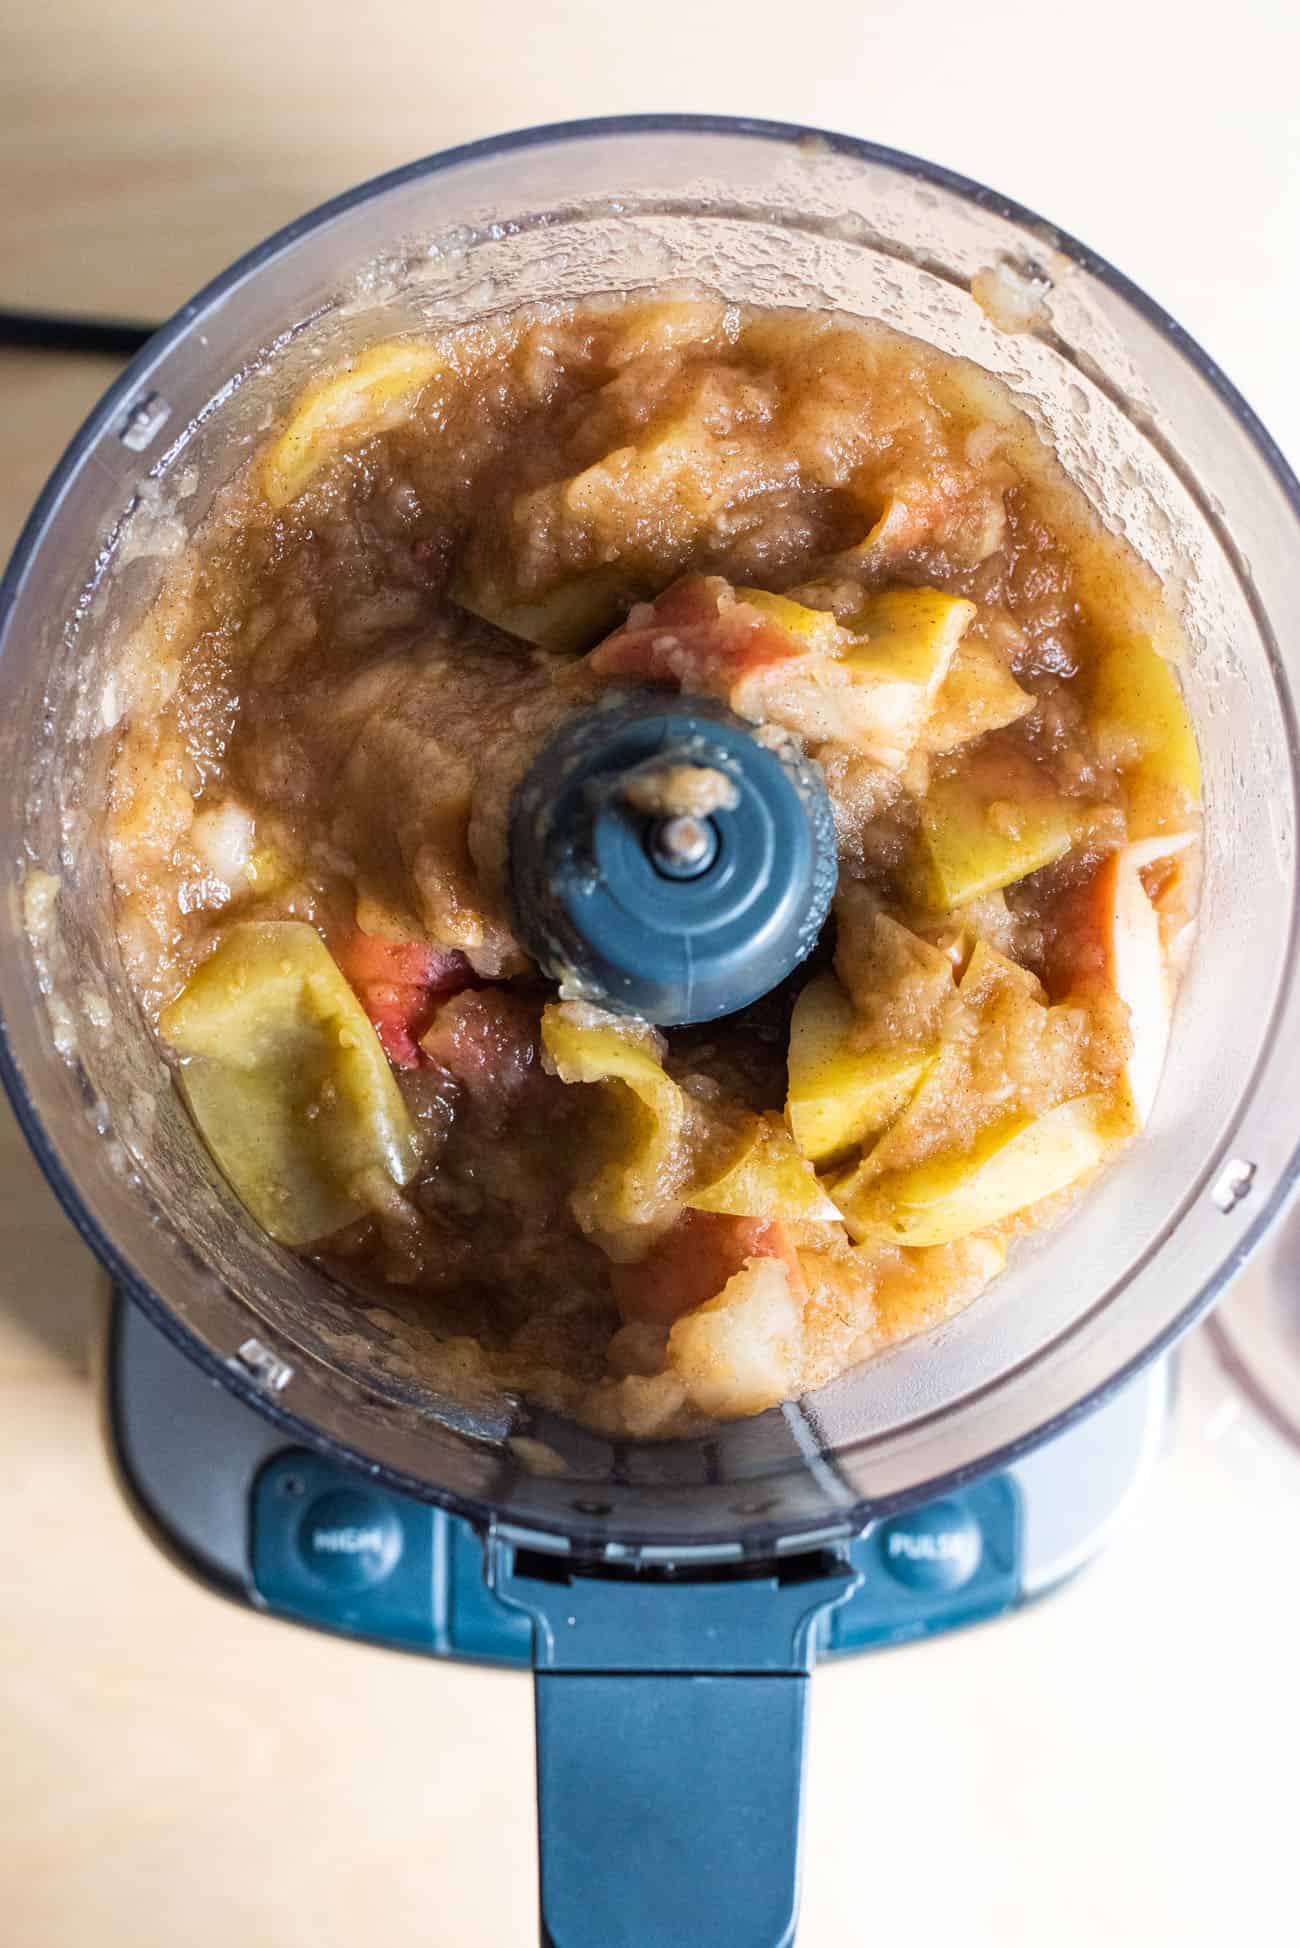 Cooked apples in a food processor.